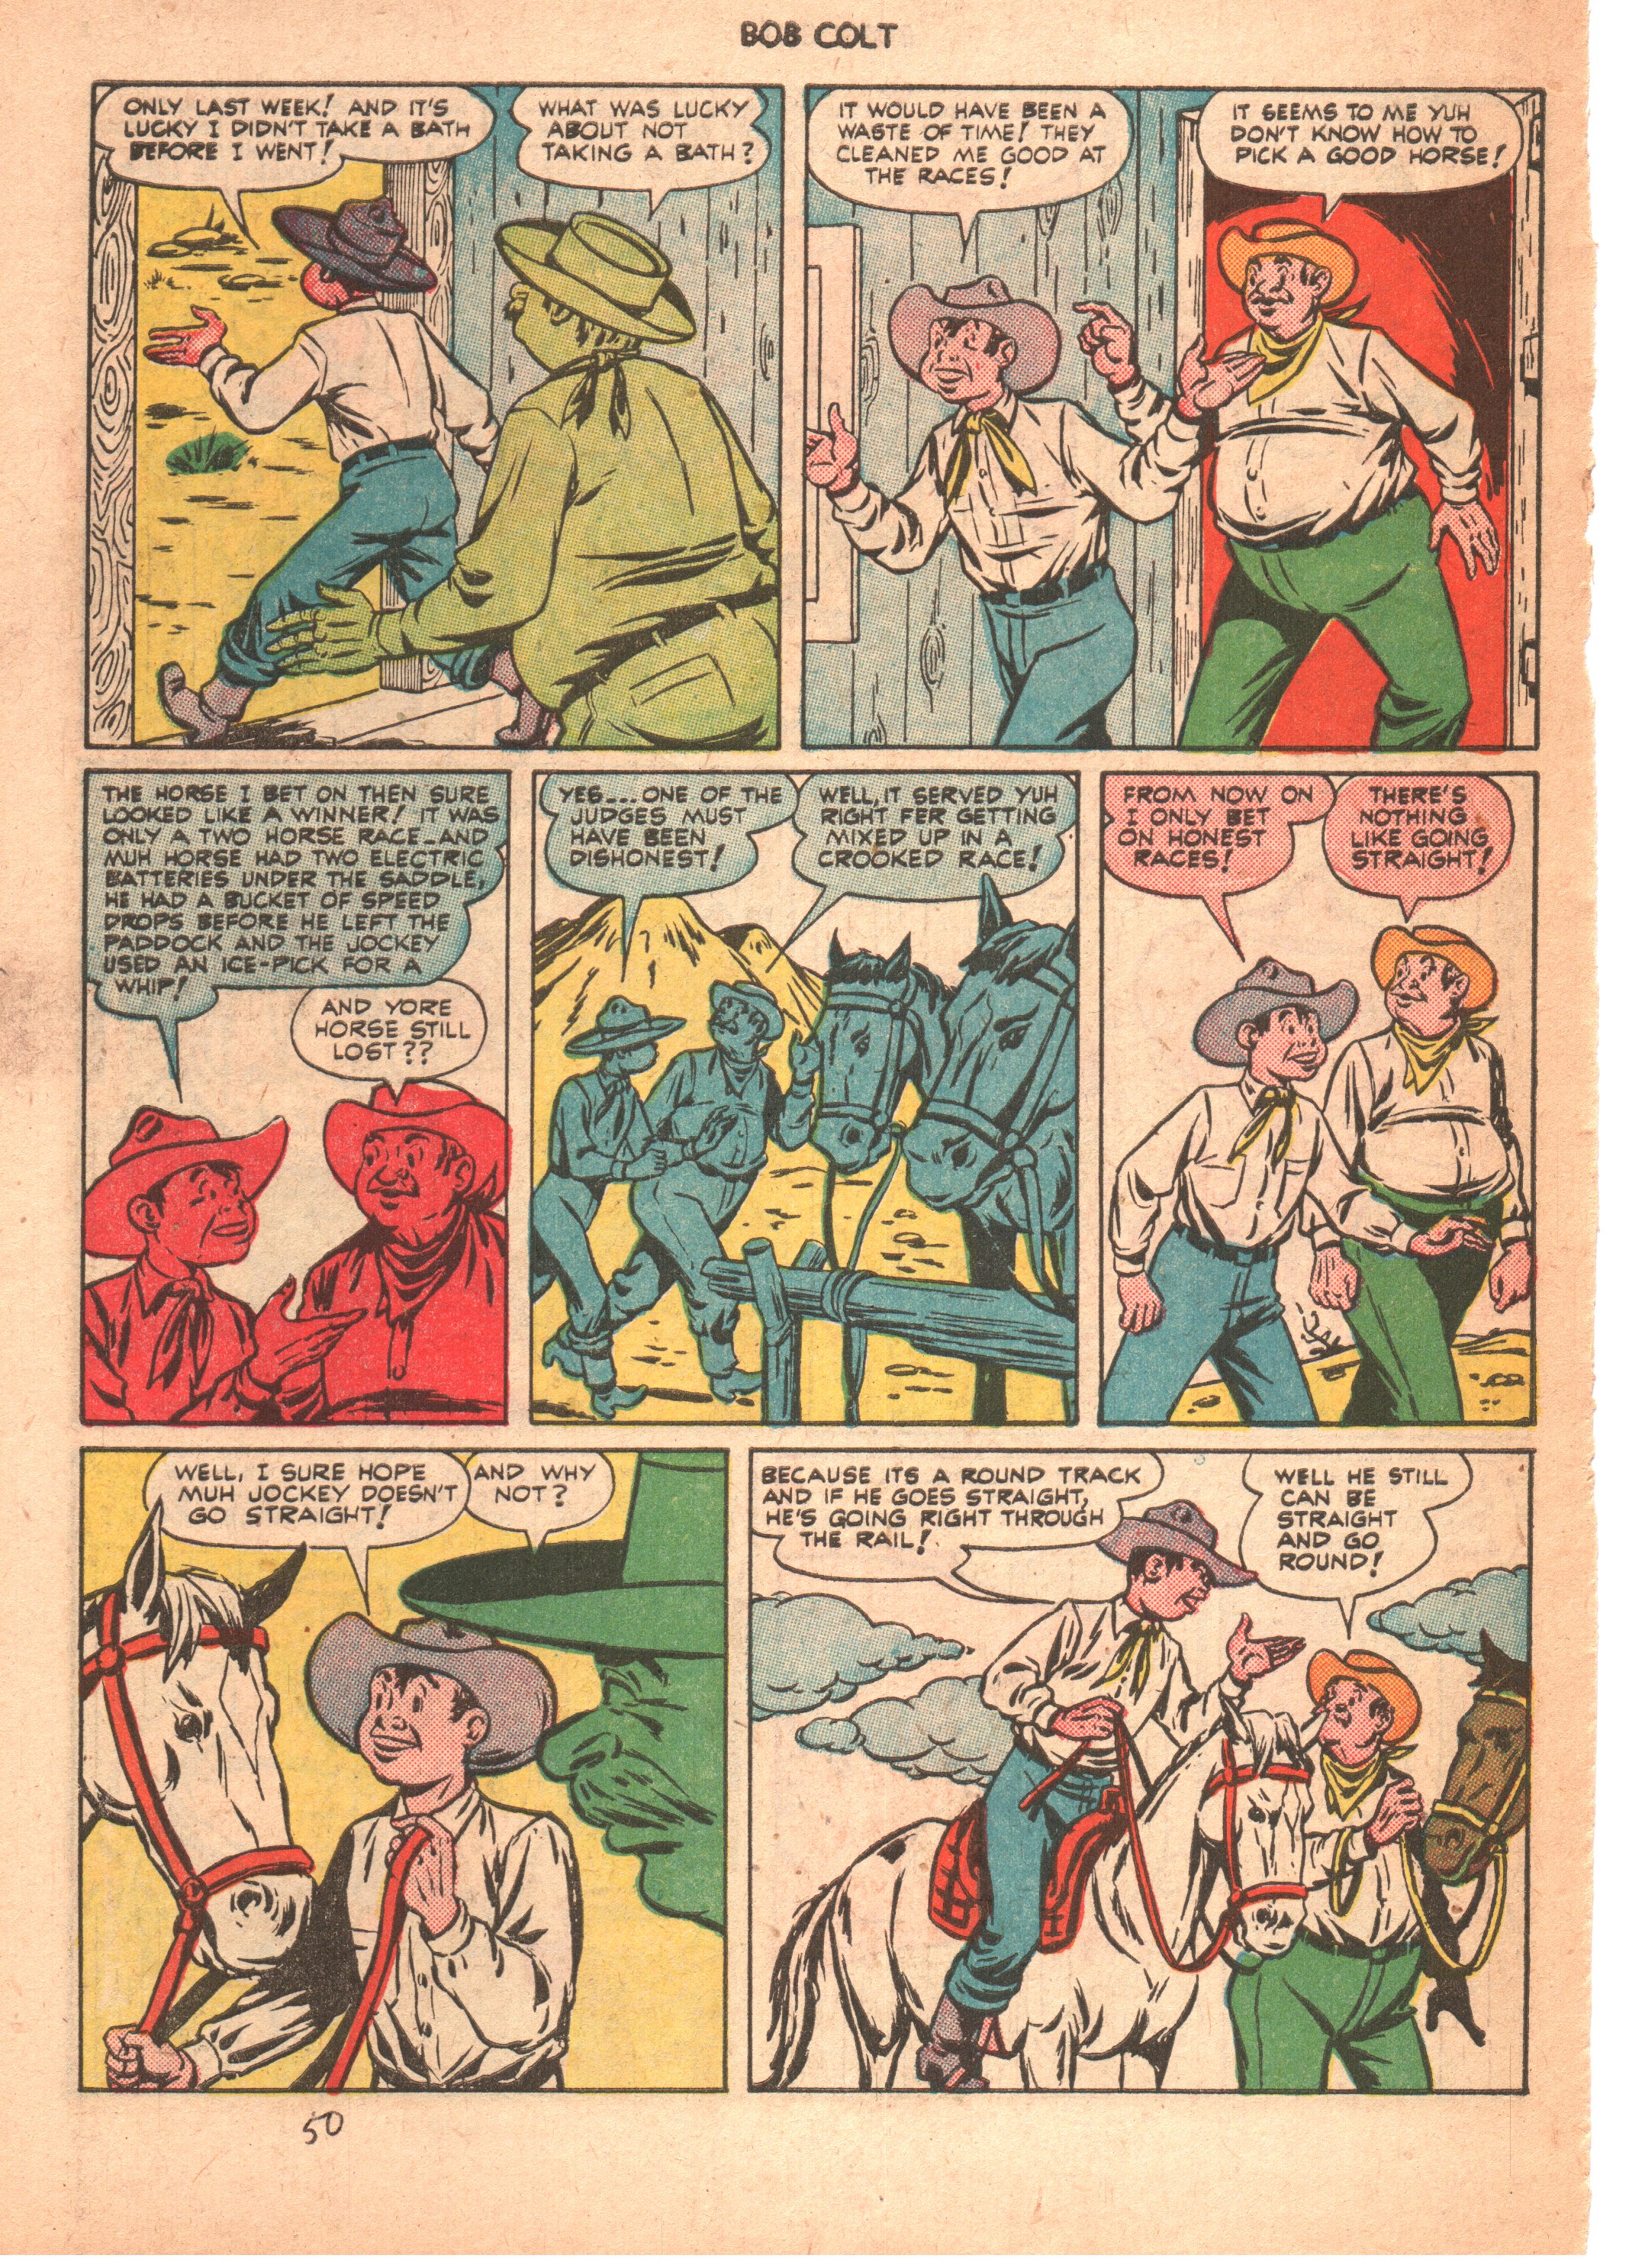 Read online Bob Colt Western comic -  Issue #6 - 17